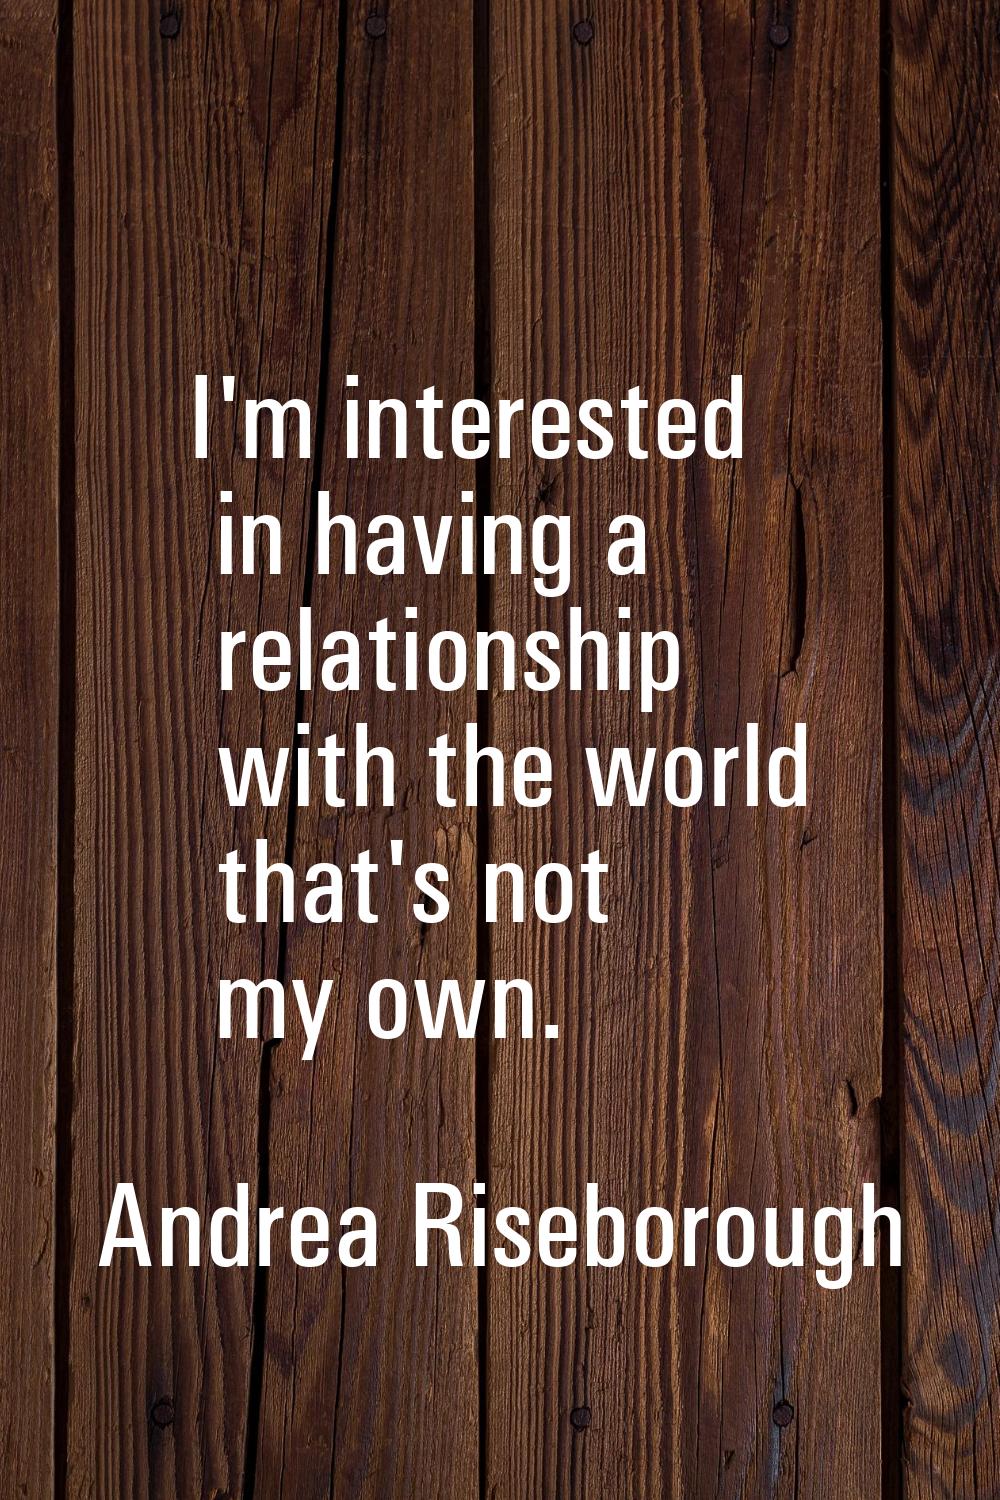 I'm interested in having a relationship with the world that's not my own.